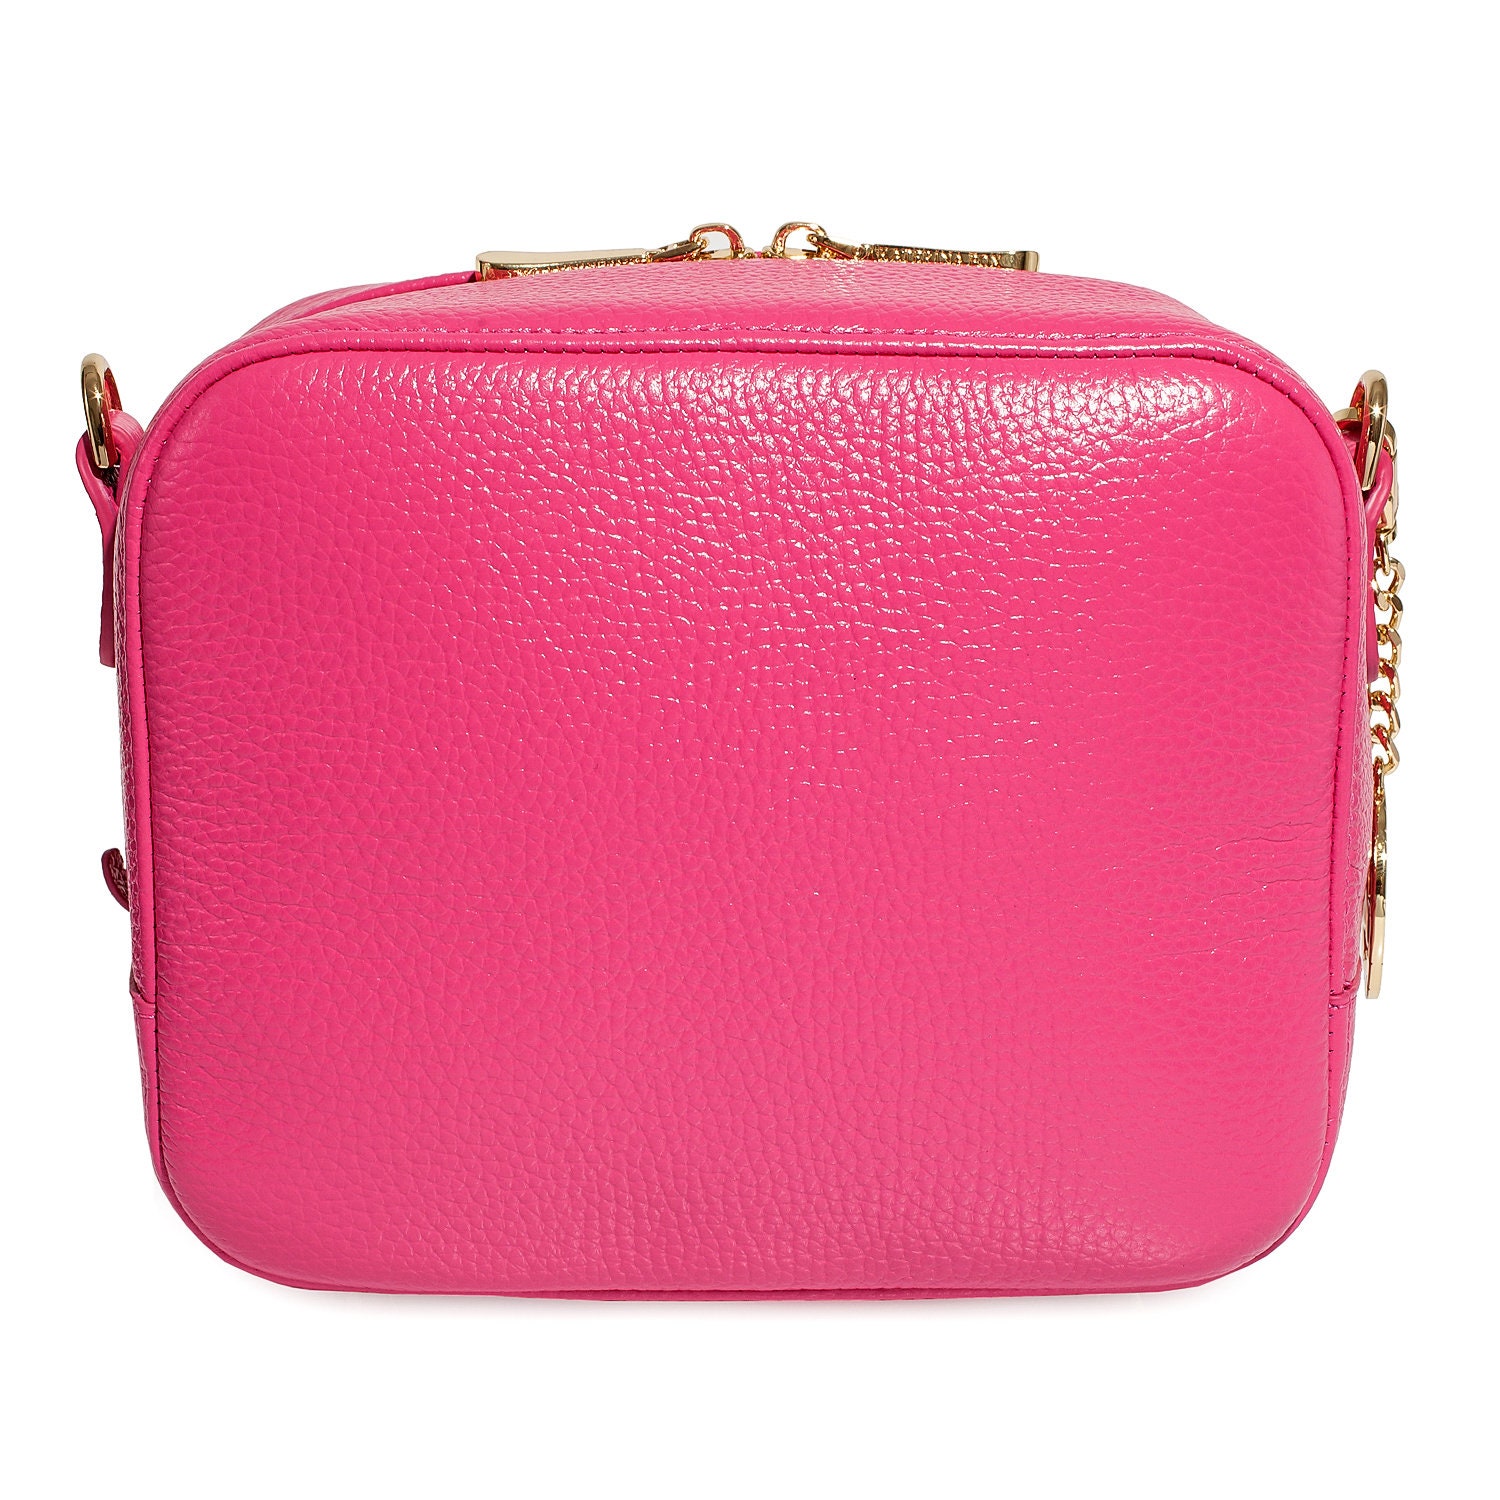 Buy online Pink Leatherette (pu) Regular Handbag from bags for Women by  Esbeda for ₹3099 at 20% off